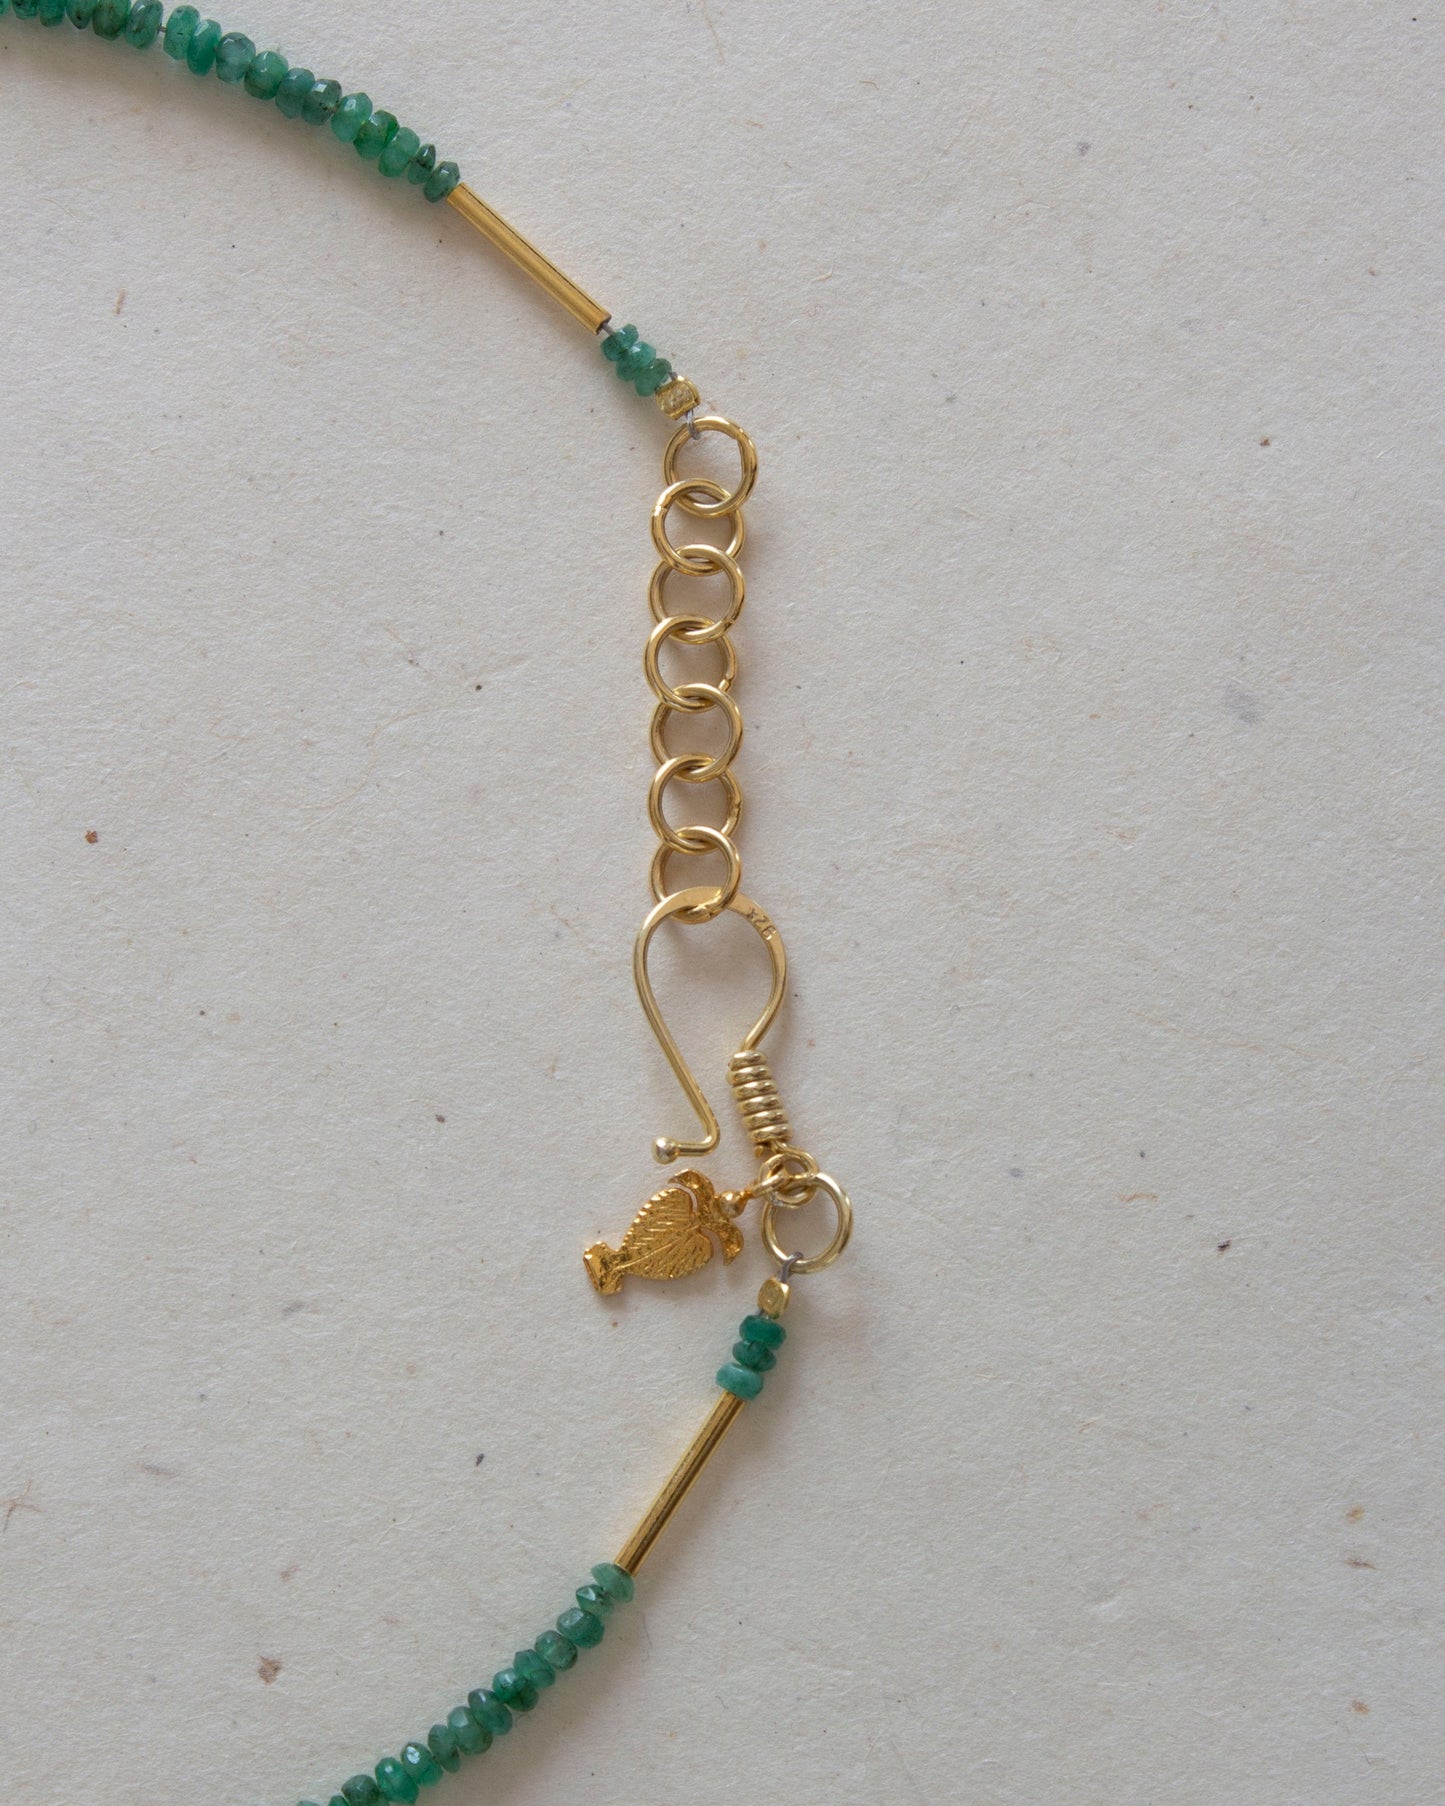 Hook detail of emerald necklace